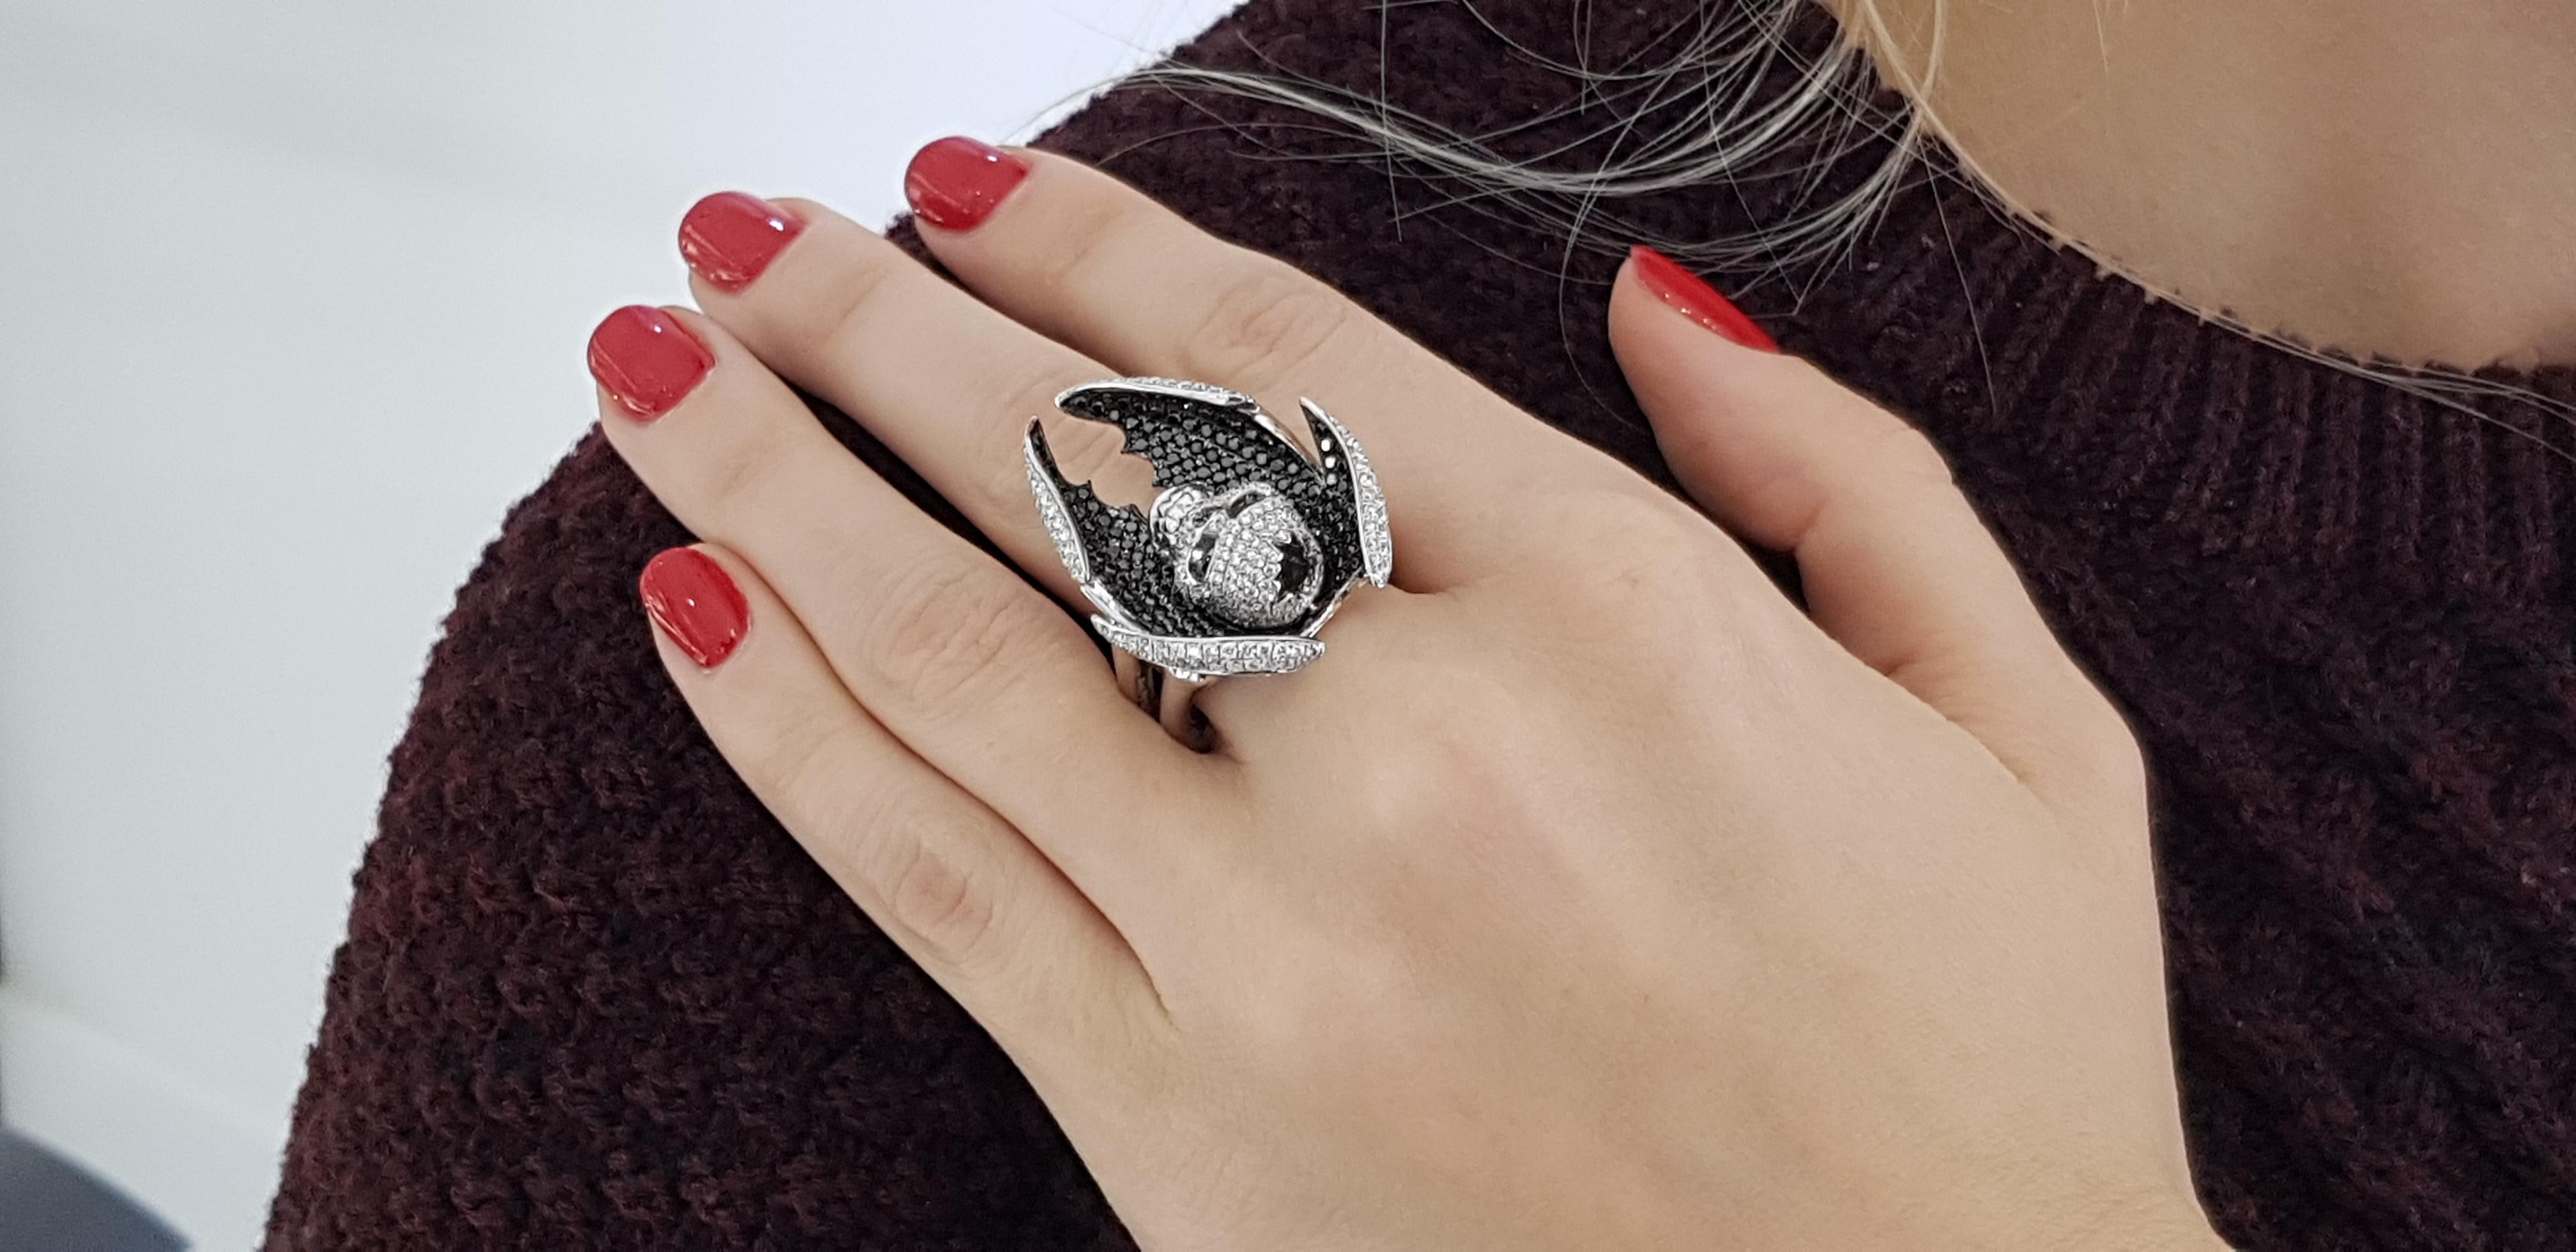 Made by Tresor Paris this Contemporary and extraordinary ring has a total of 4.03 Carats featuring 2.25 carat of Black Diamonds with magnificent 1.78 carat White Round Cut Diamonds White color G/H clarity VS. A totally unique addition to your